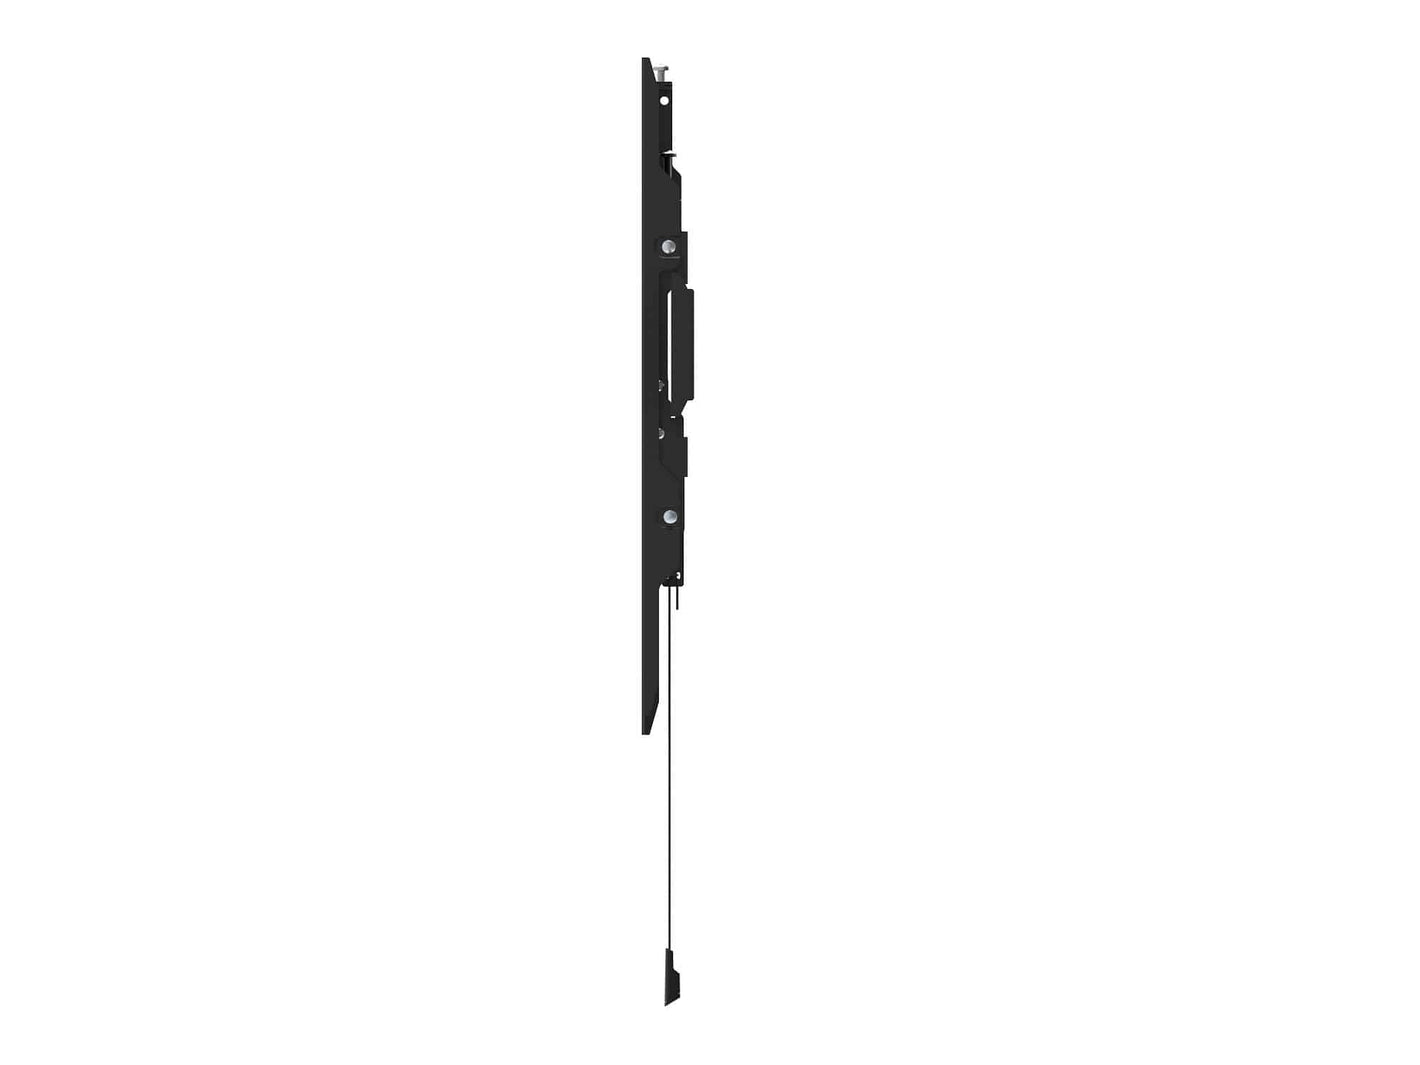 Tono FWM 02 TV Wall Mount for LCD, LED and PLASMA TV's